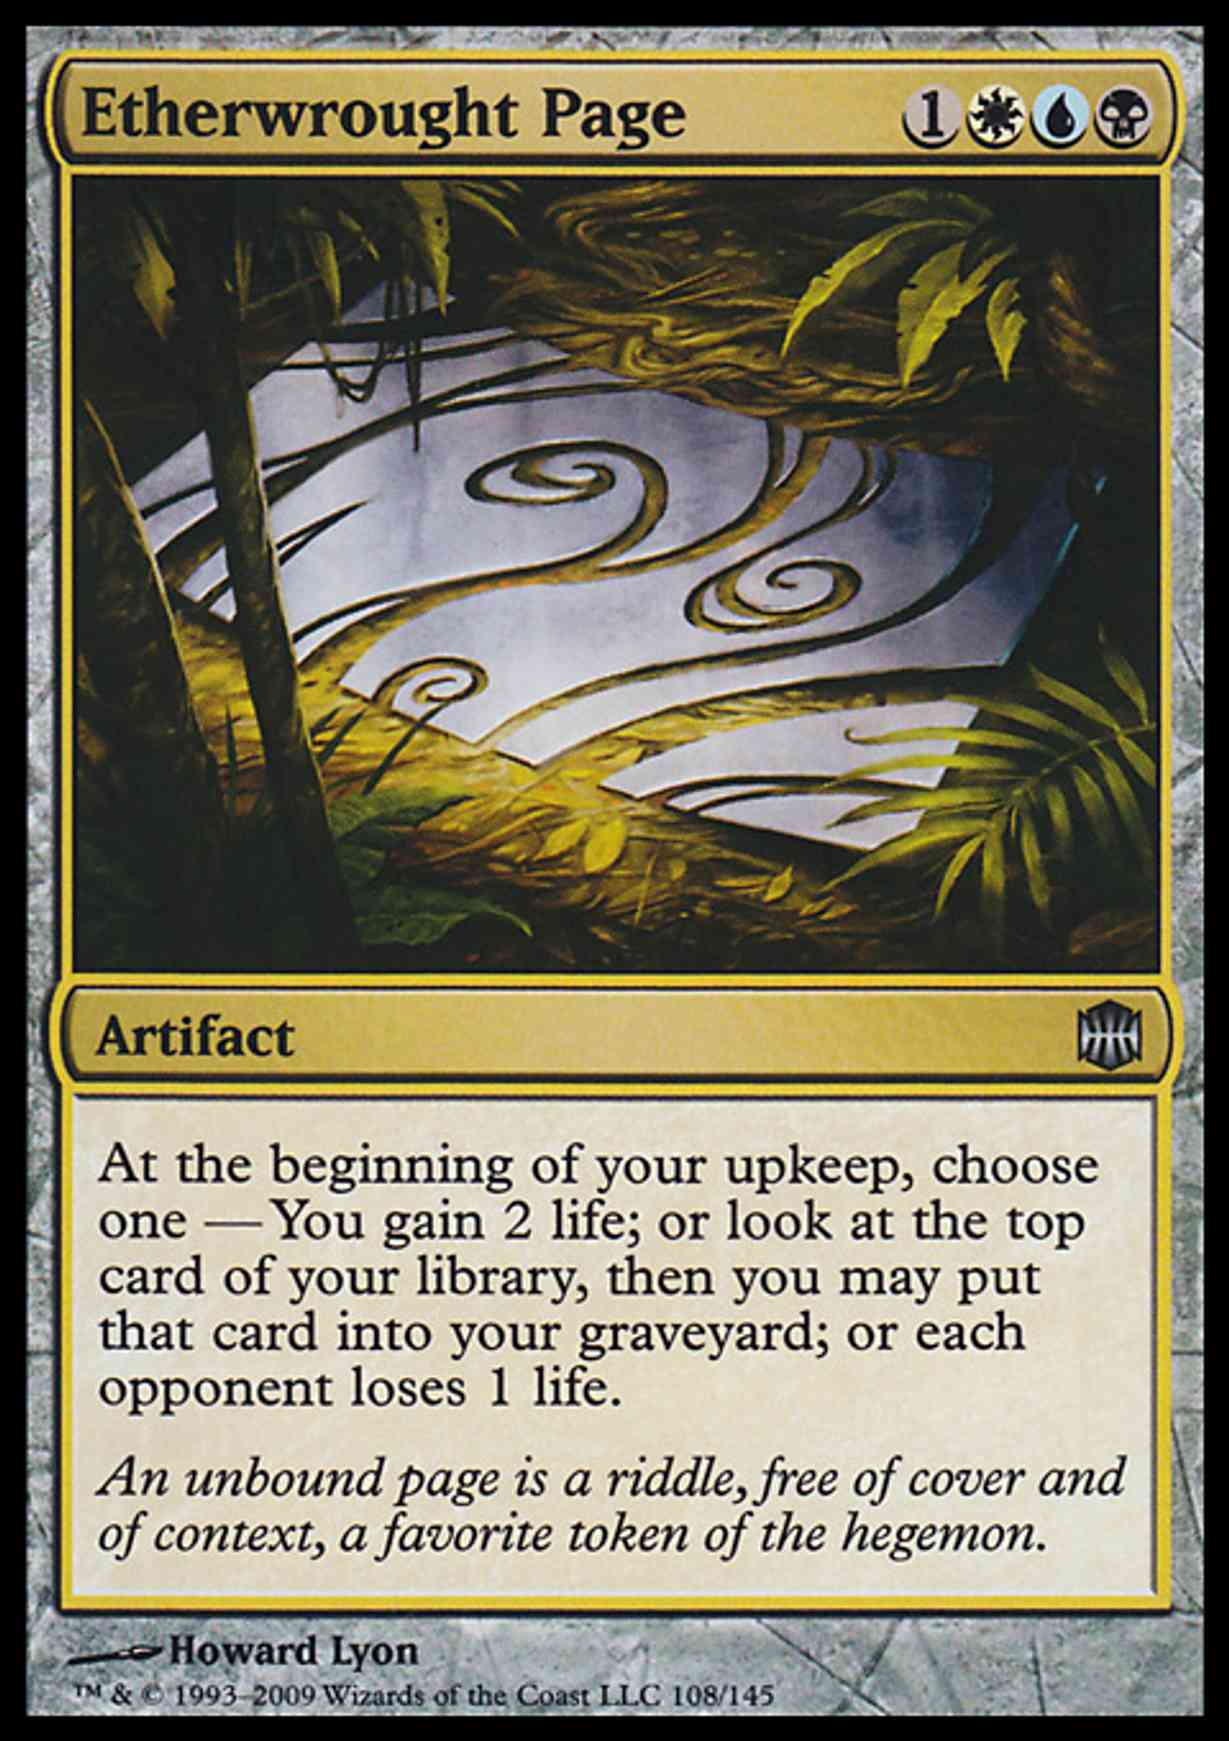 Etherwrought Page magic card front